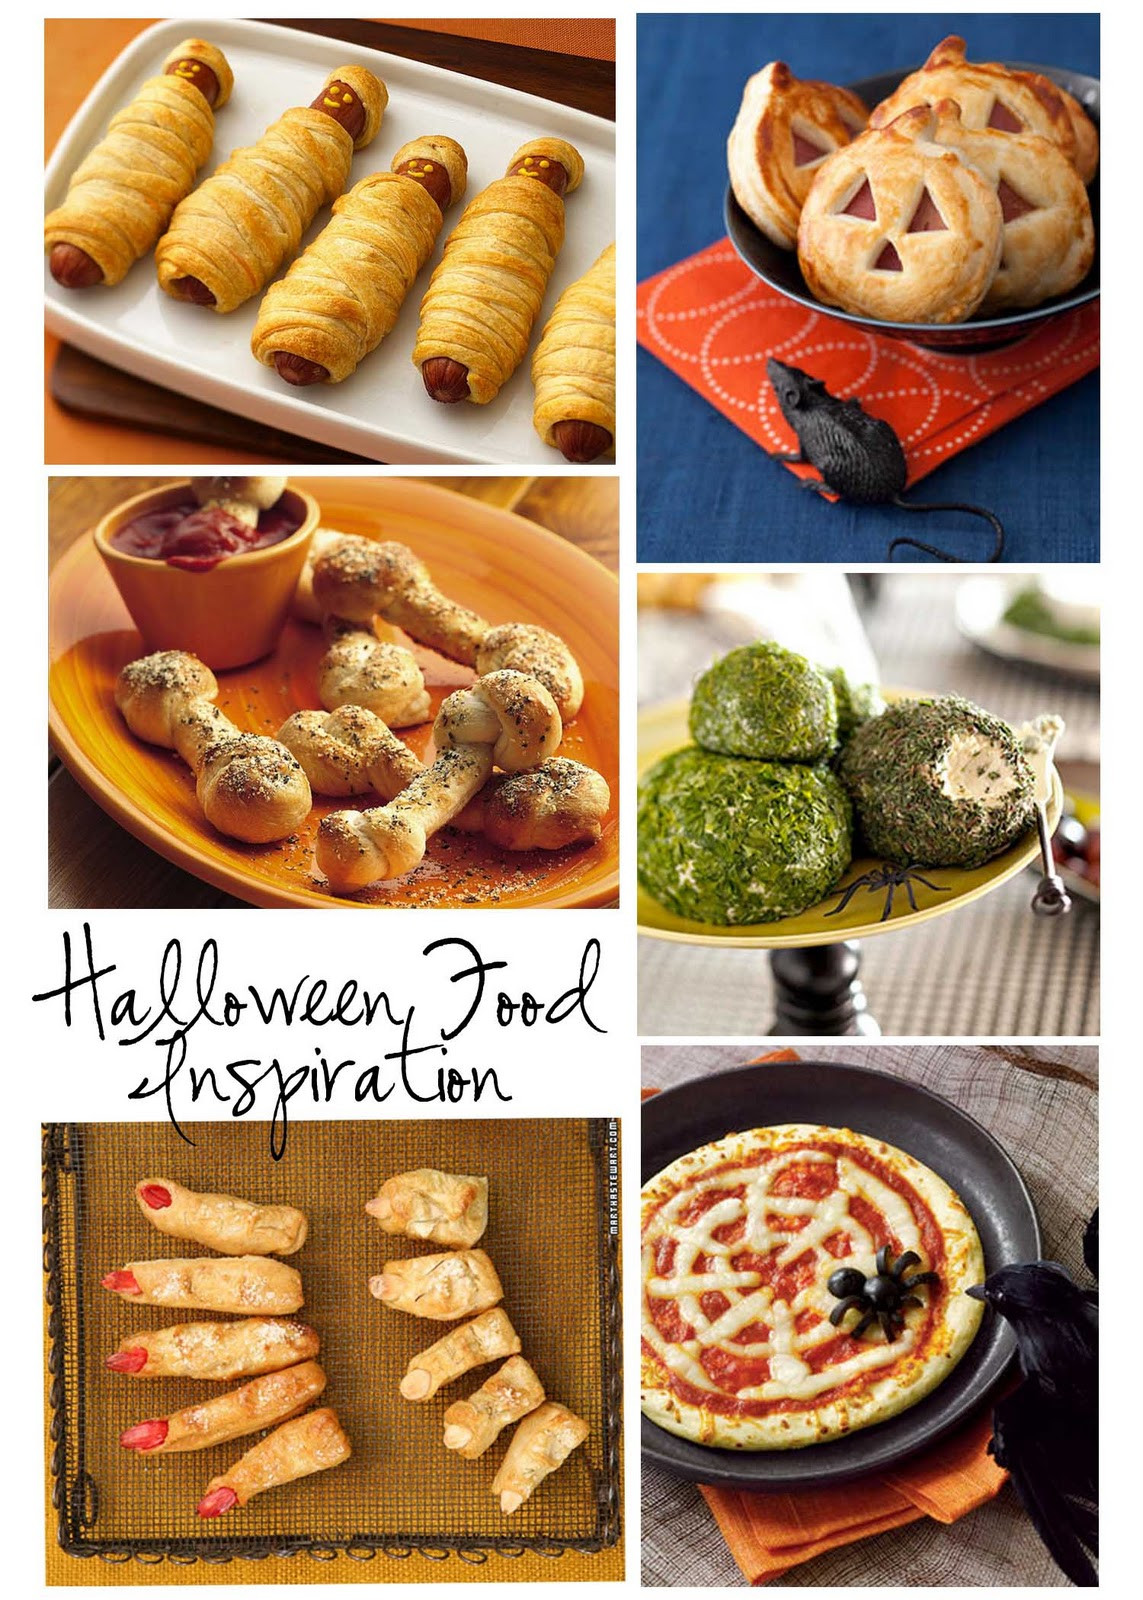 Halloween Party Food Ideas
 Room to Inspire Spooky Food Ideas